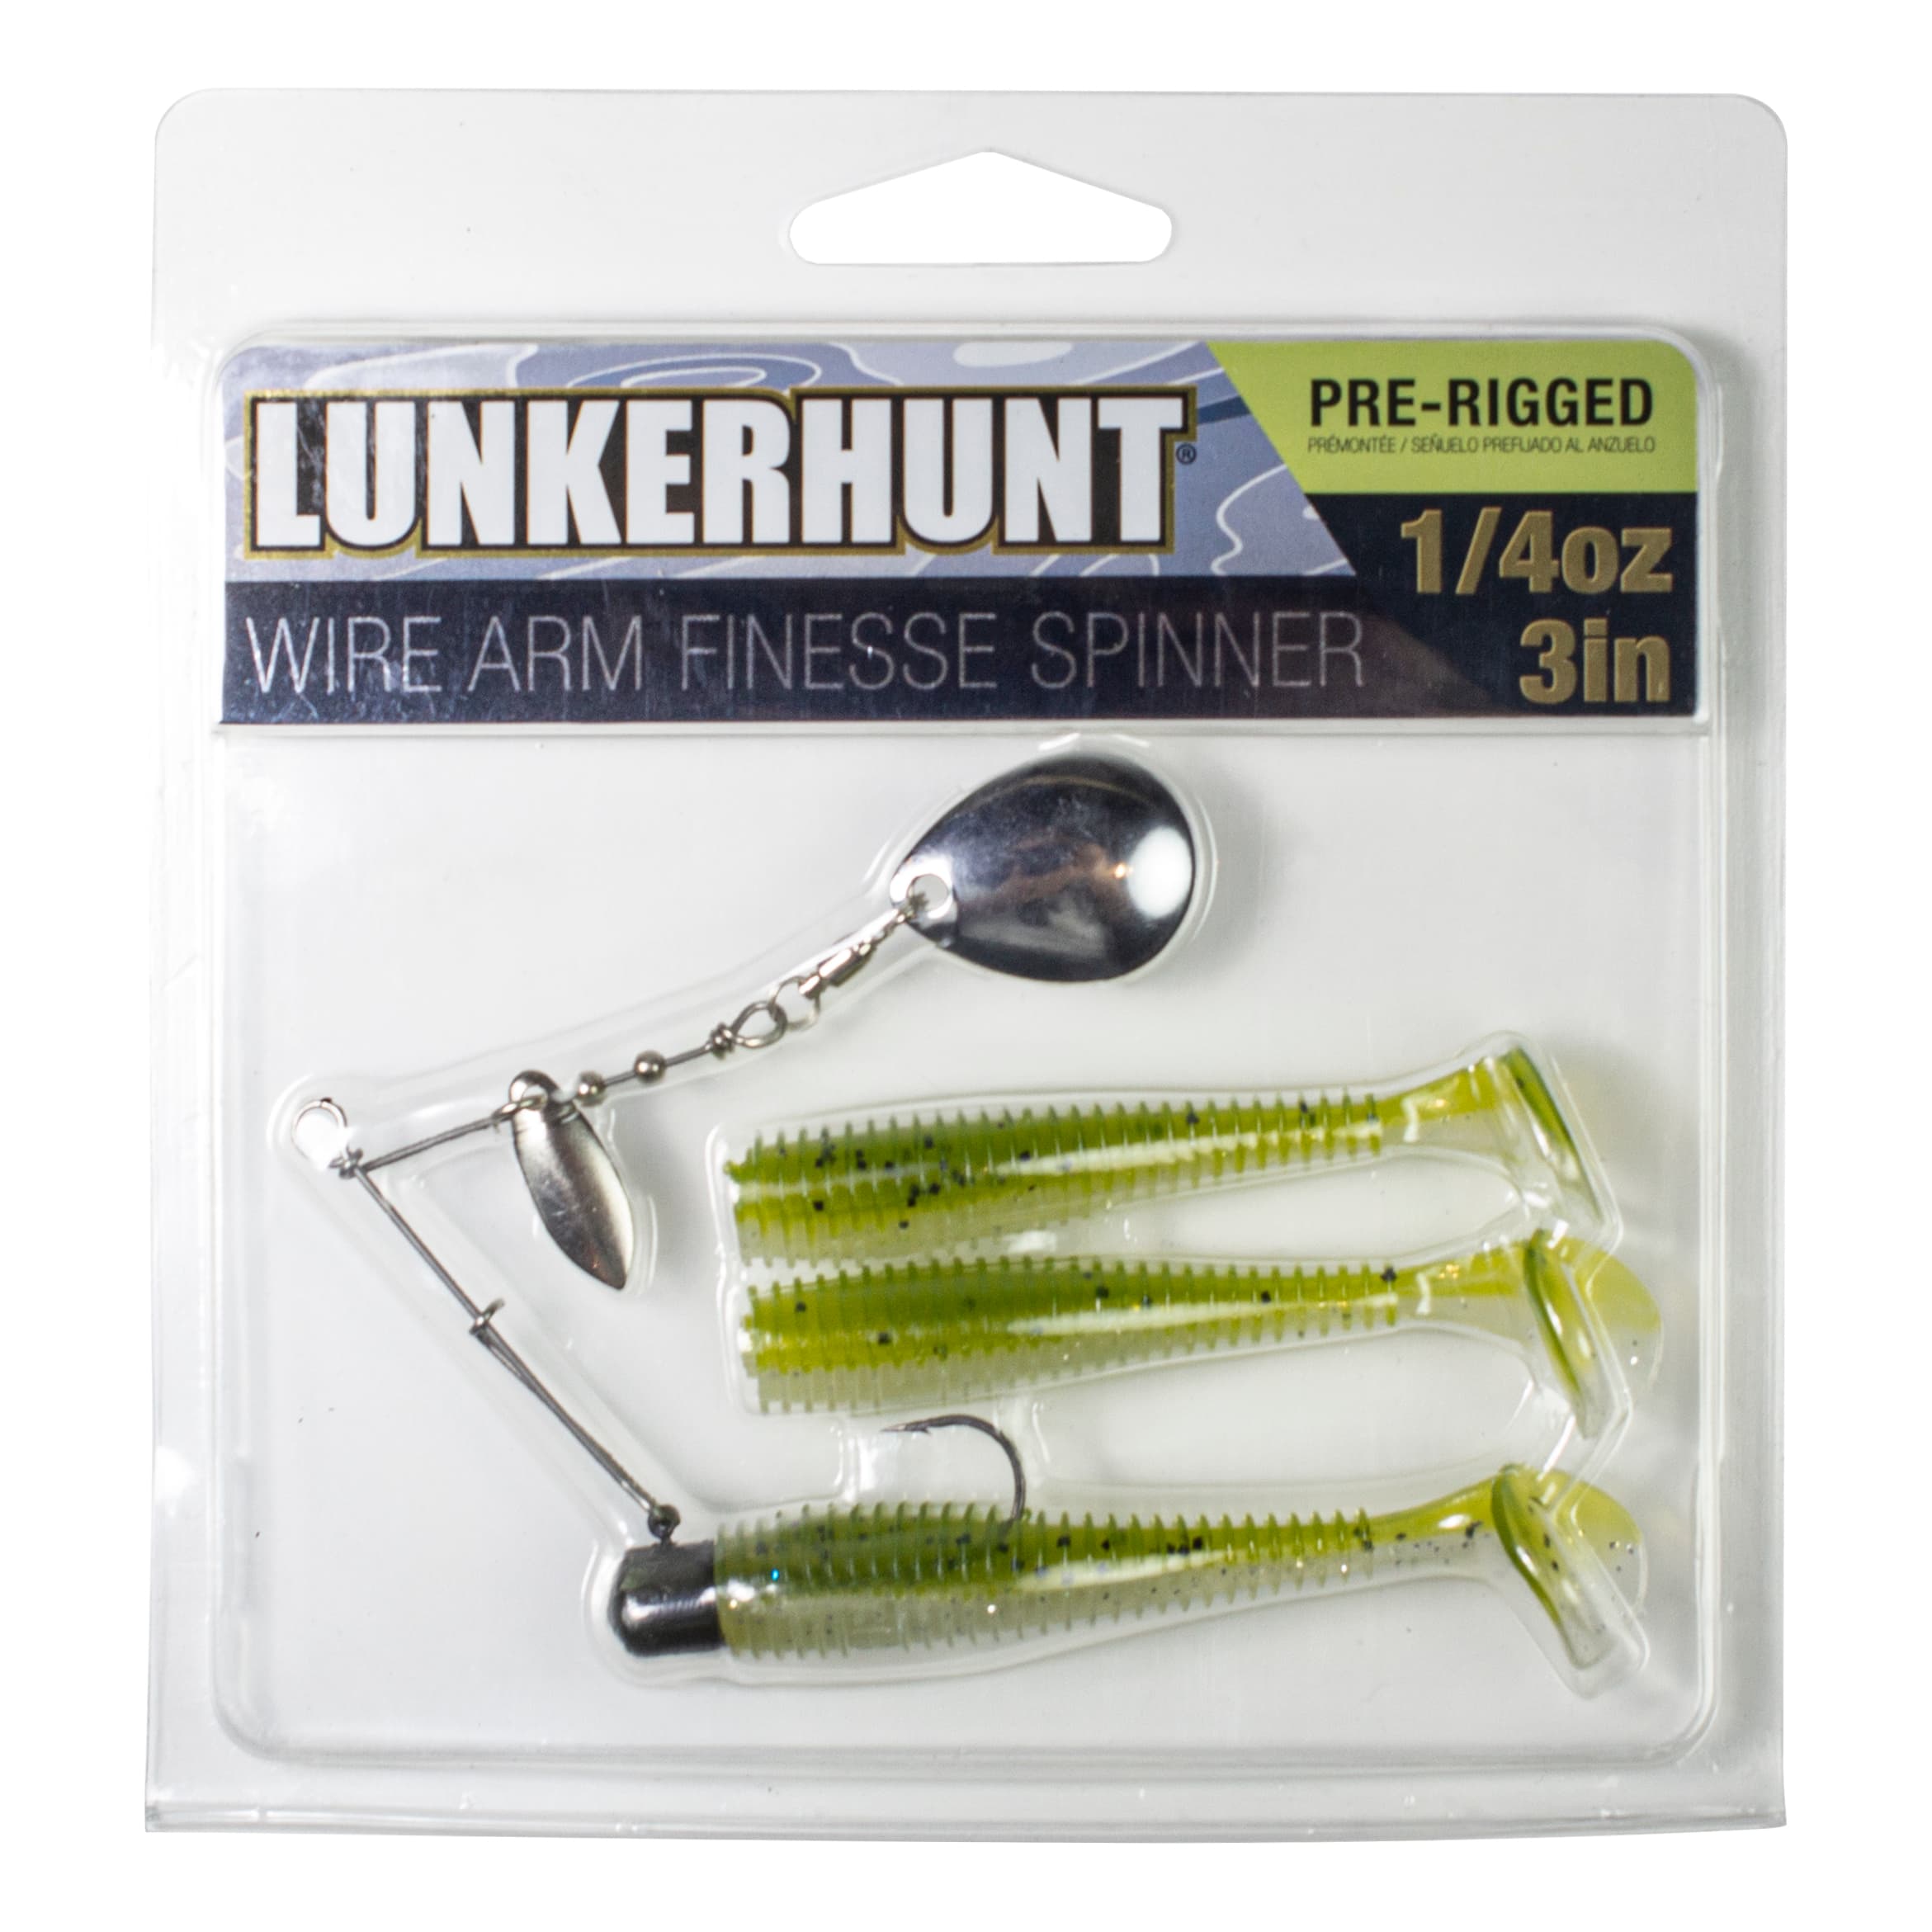 Lunkerhunt® Wire Arm Finesse Spinnerbait Kit - Sexy Melon